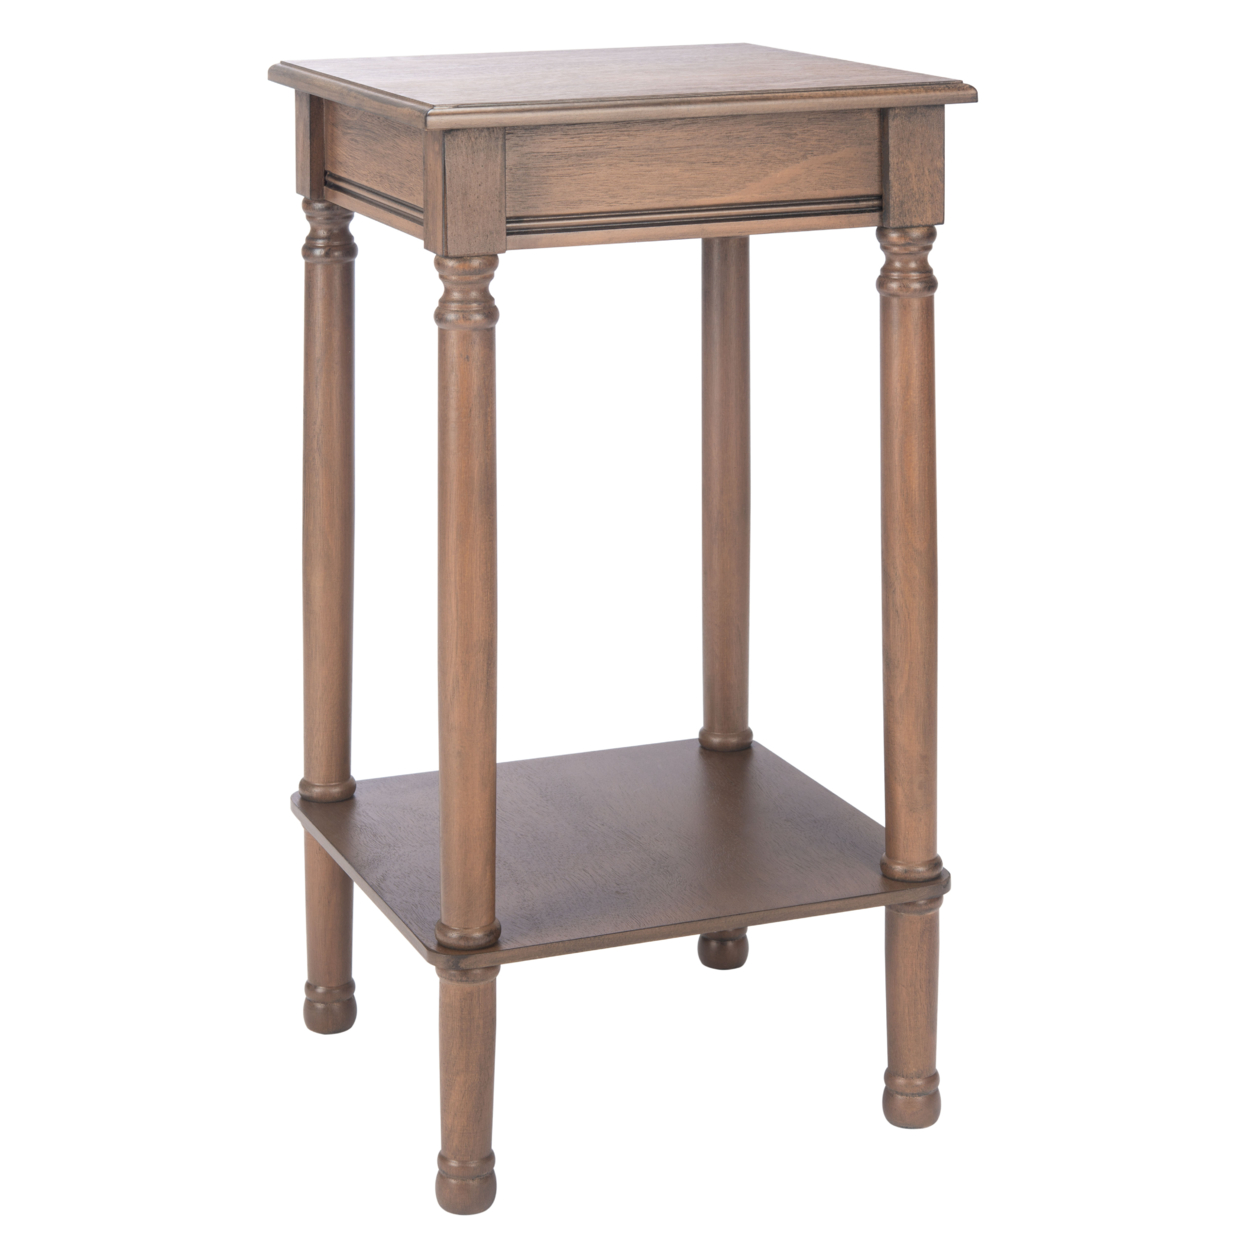 SAFAVIEH Tinsley Square Accent Table Brown